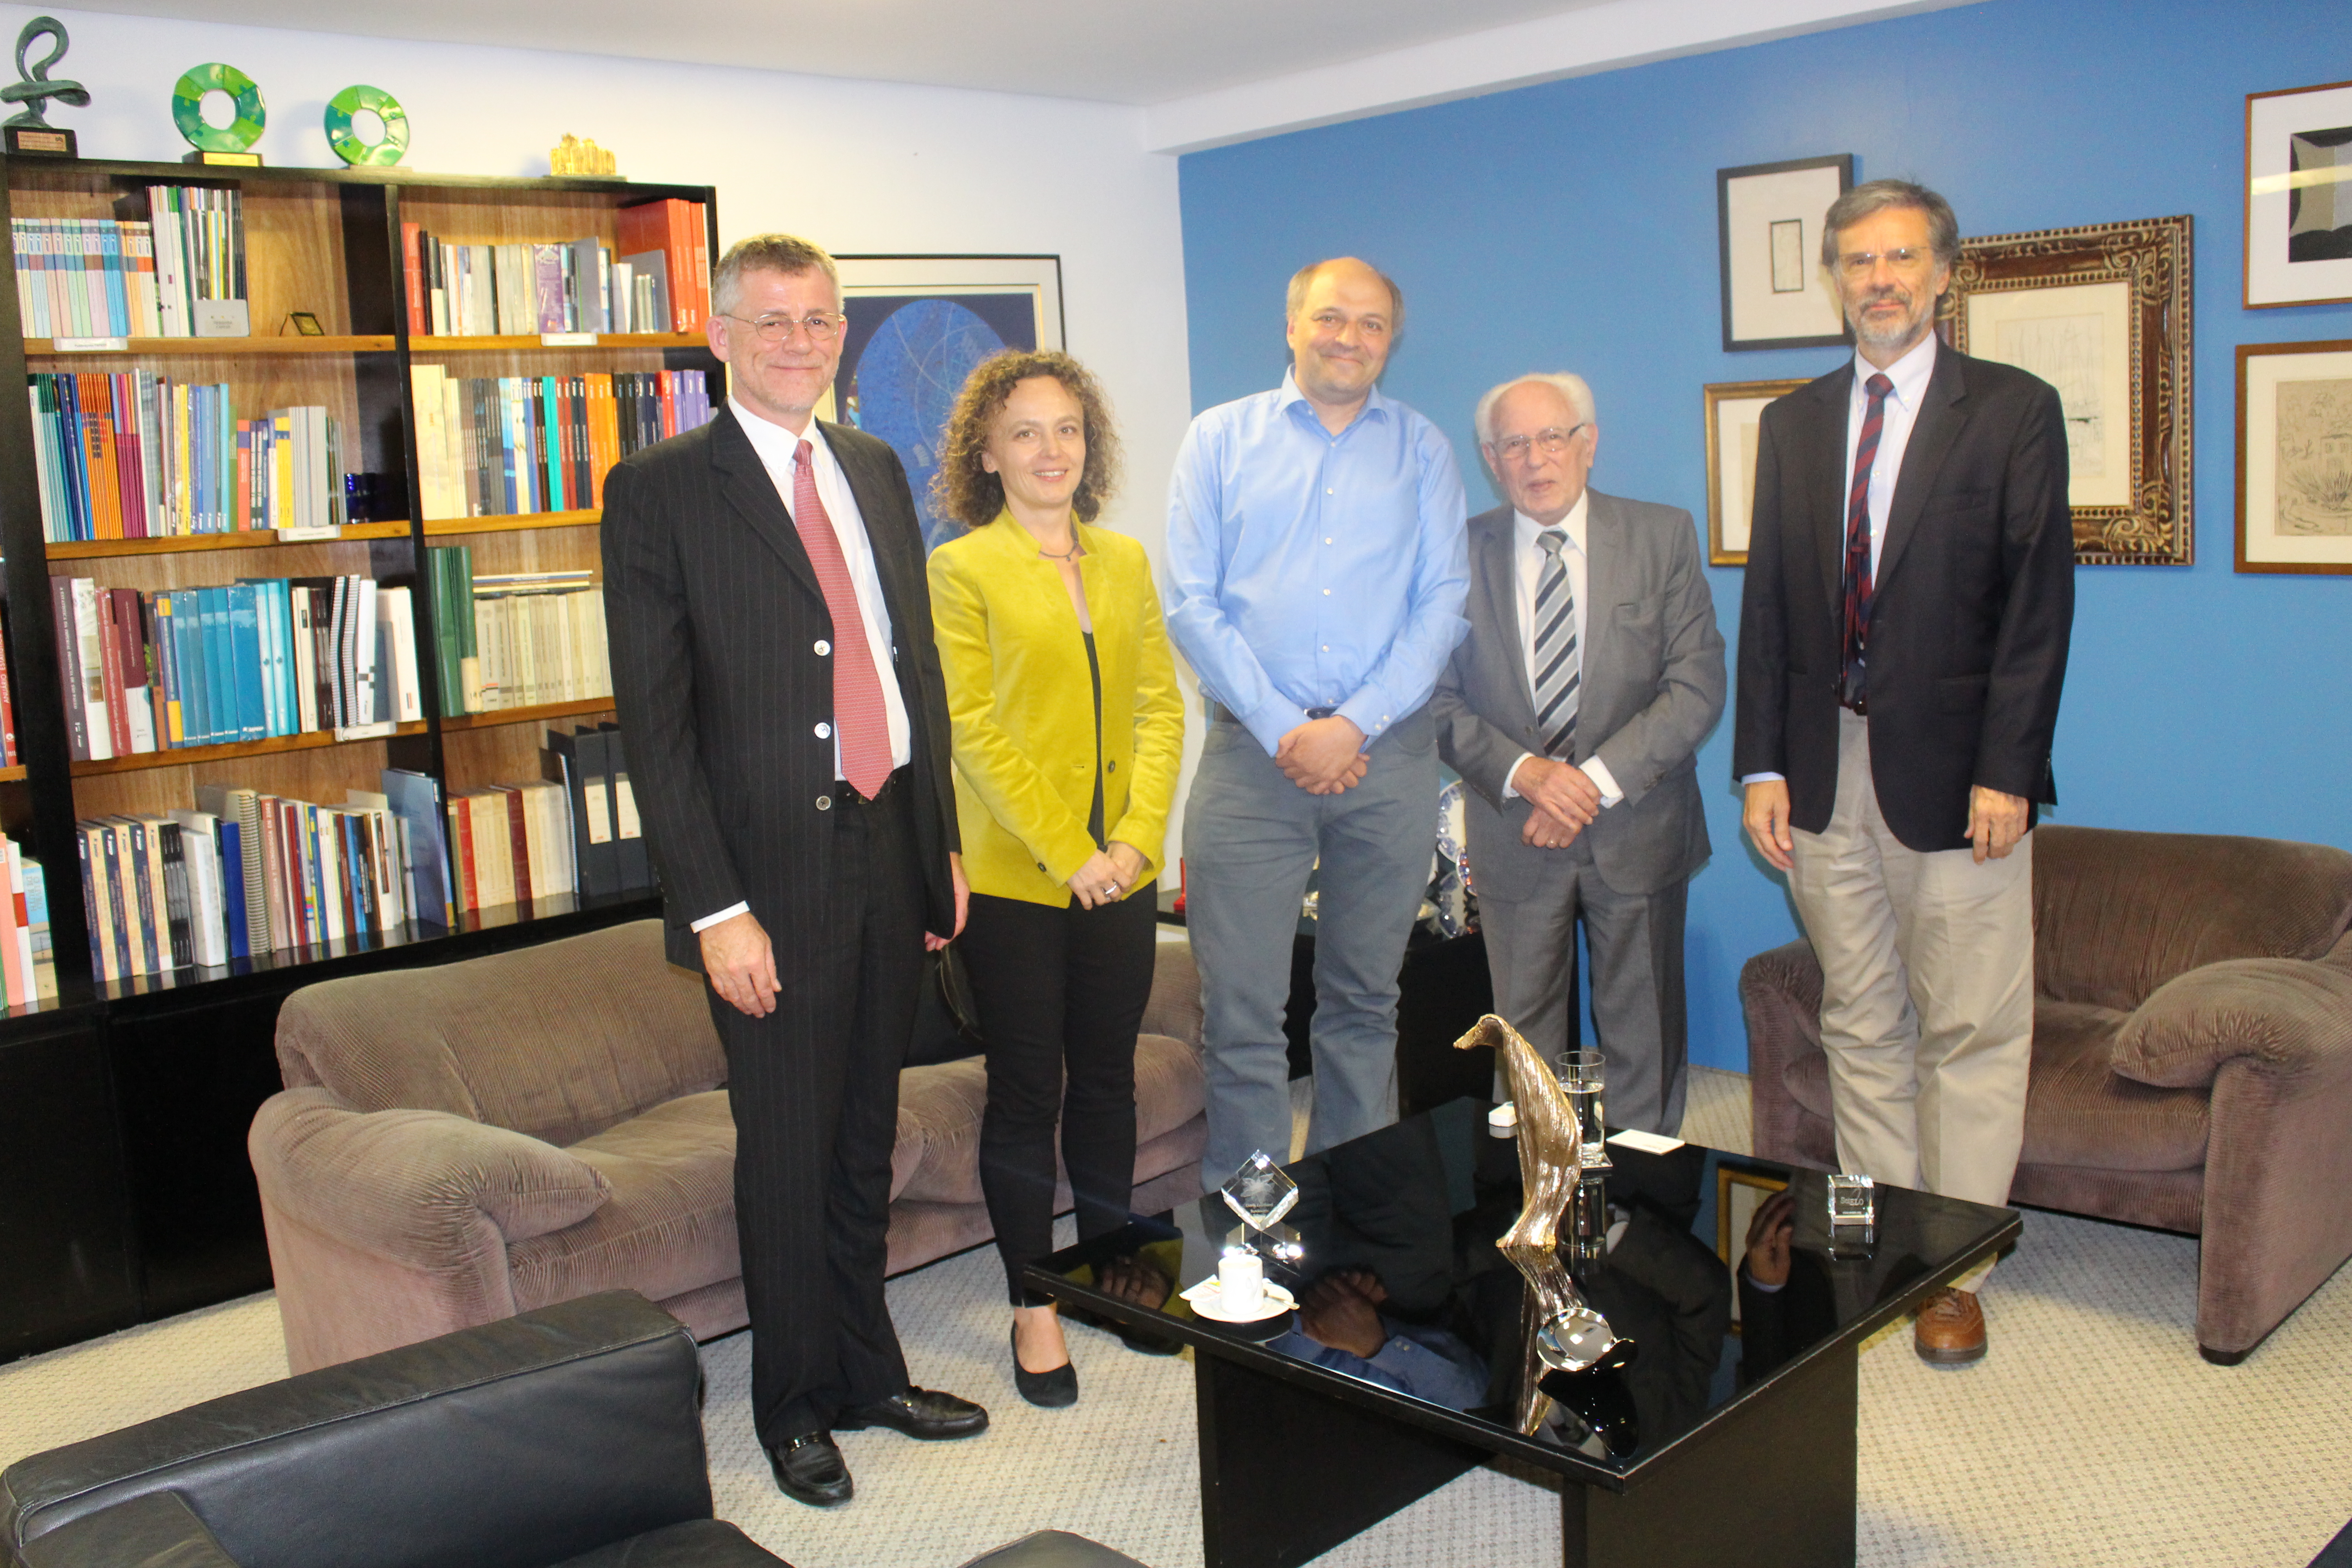 Meeting with FAPESP President José Goldemberg (2nd from right)